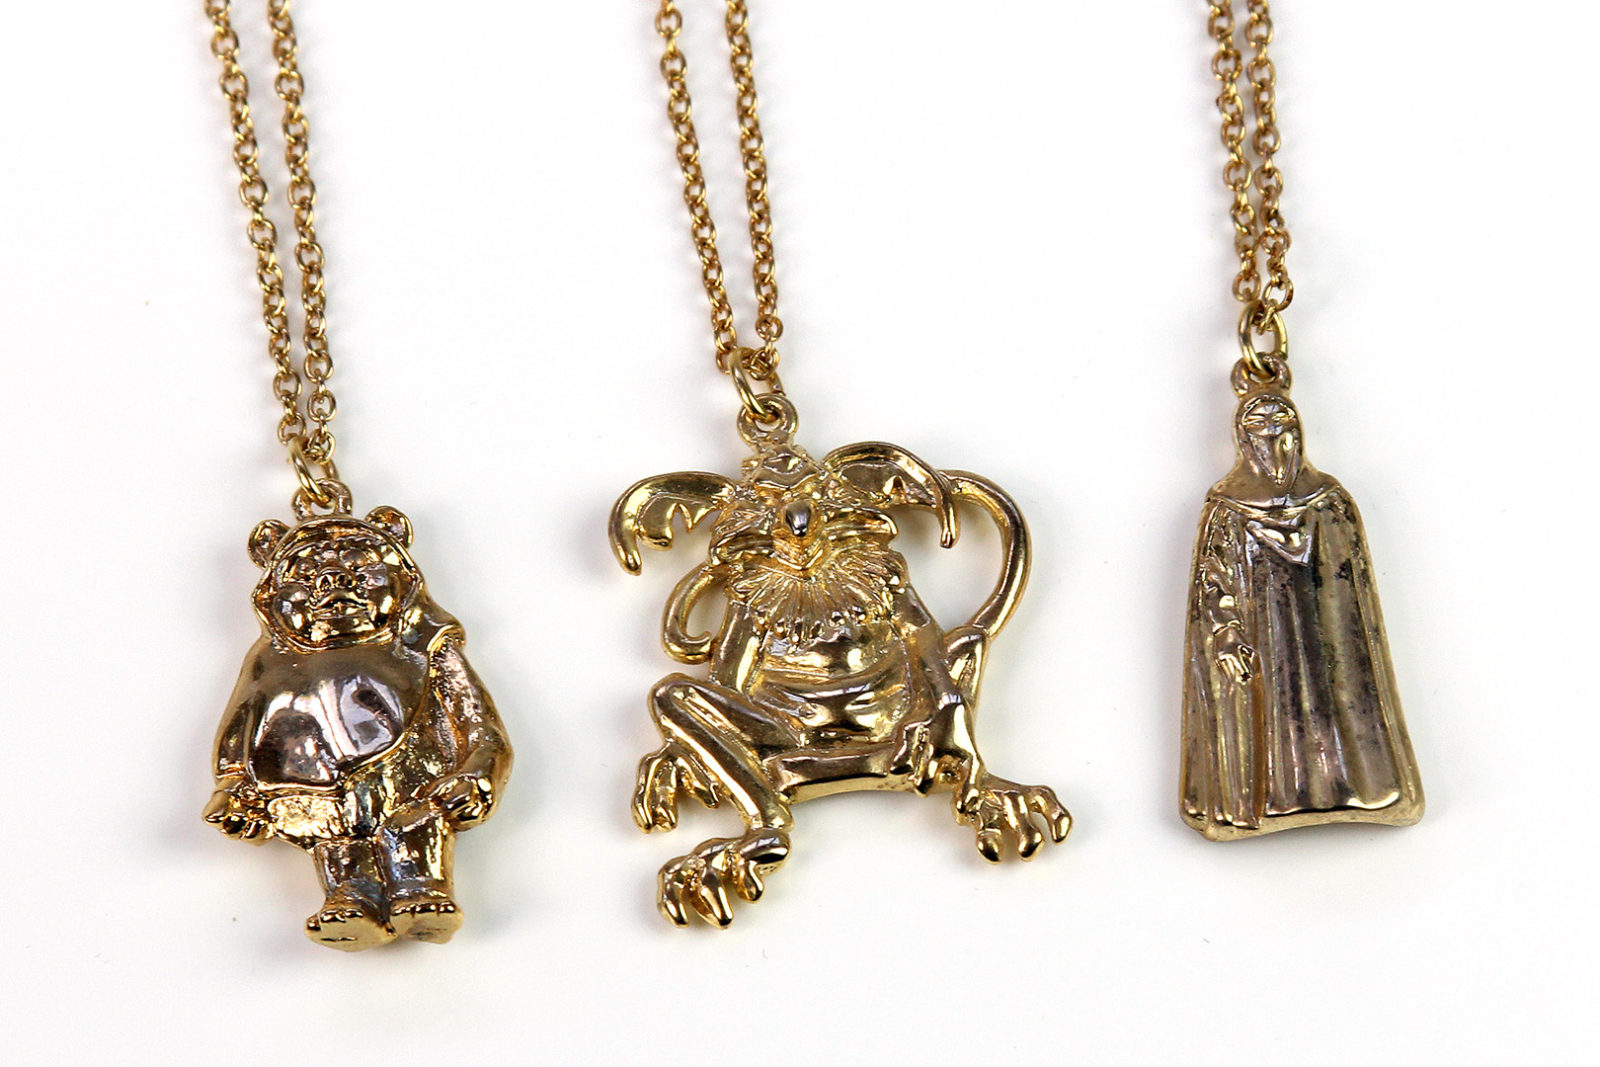 Character necklaces by Adam Joseph